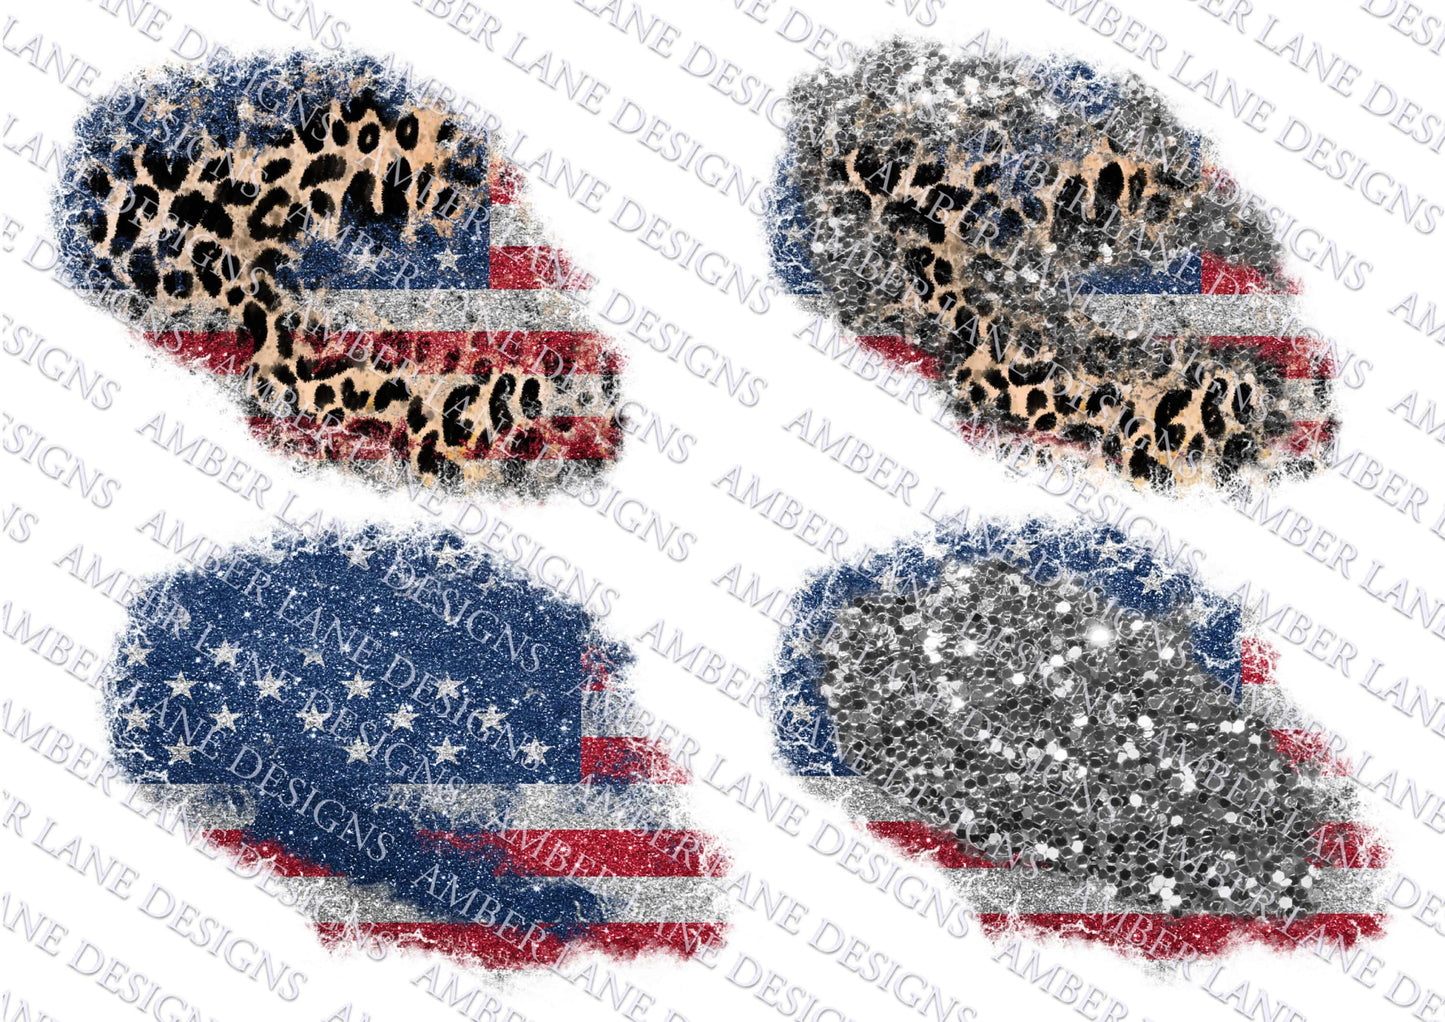 USA Flag Patches with leopard, design elements for t-shirts, 4 png files